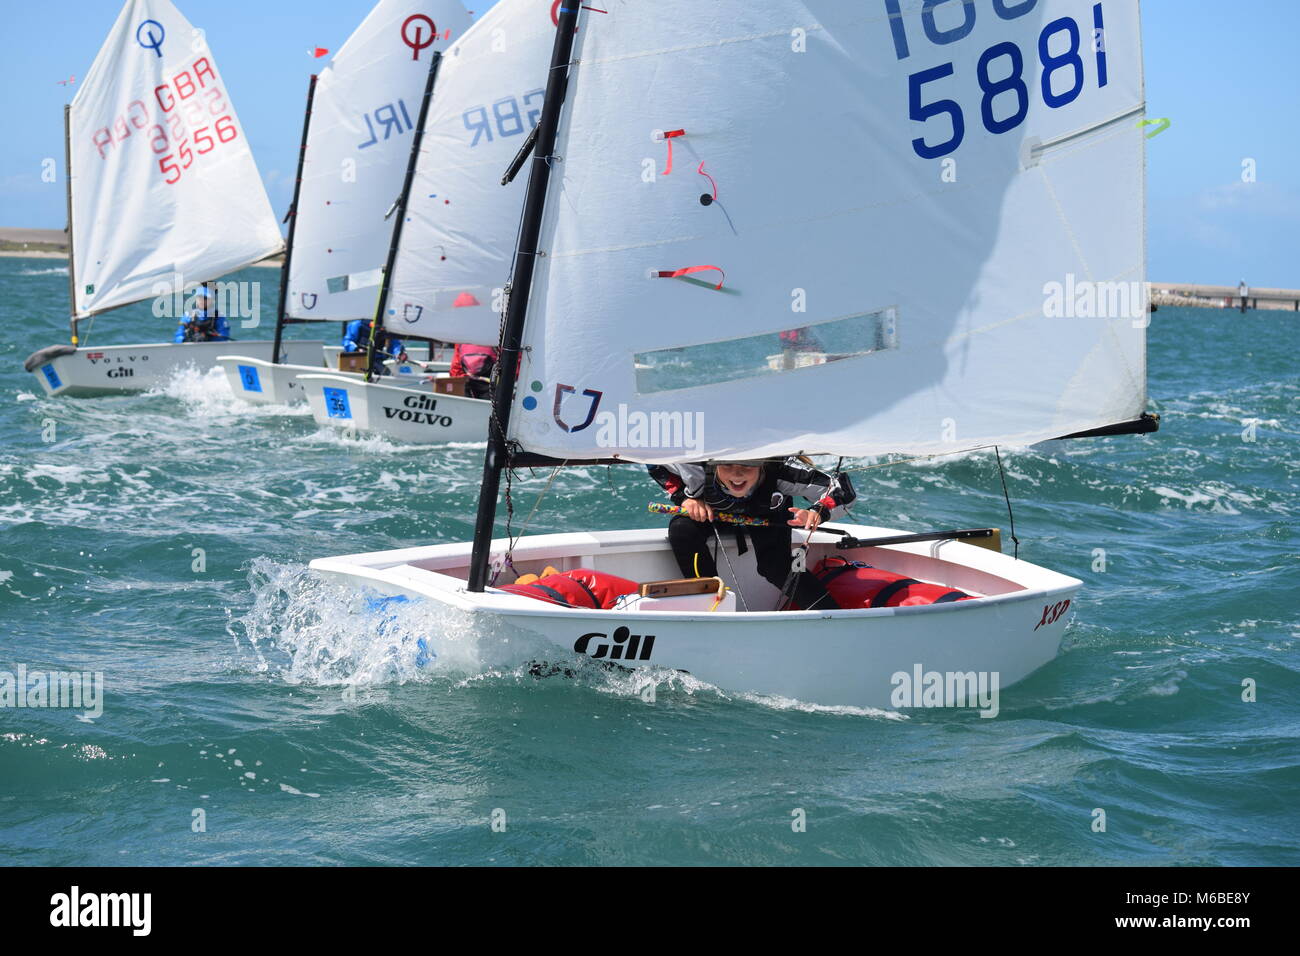 Junior sailors racing Optimist dinghies in Weymouth harbour on a sunny, windy day. Stock Photo